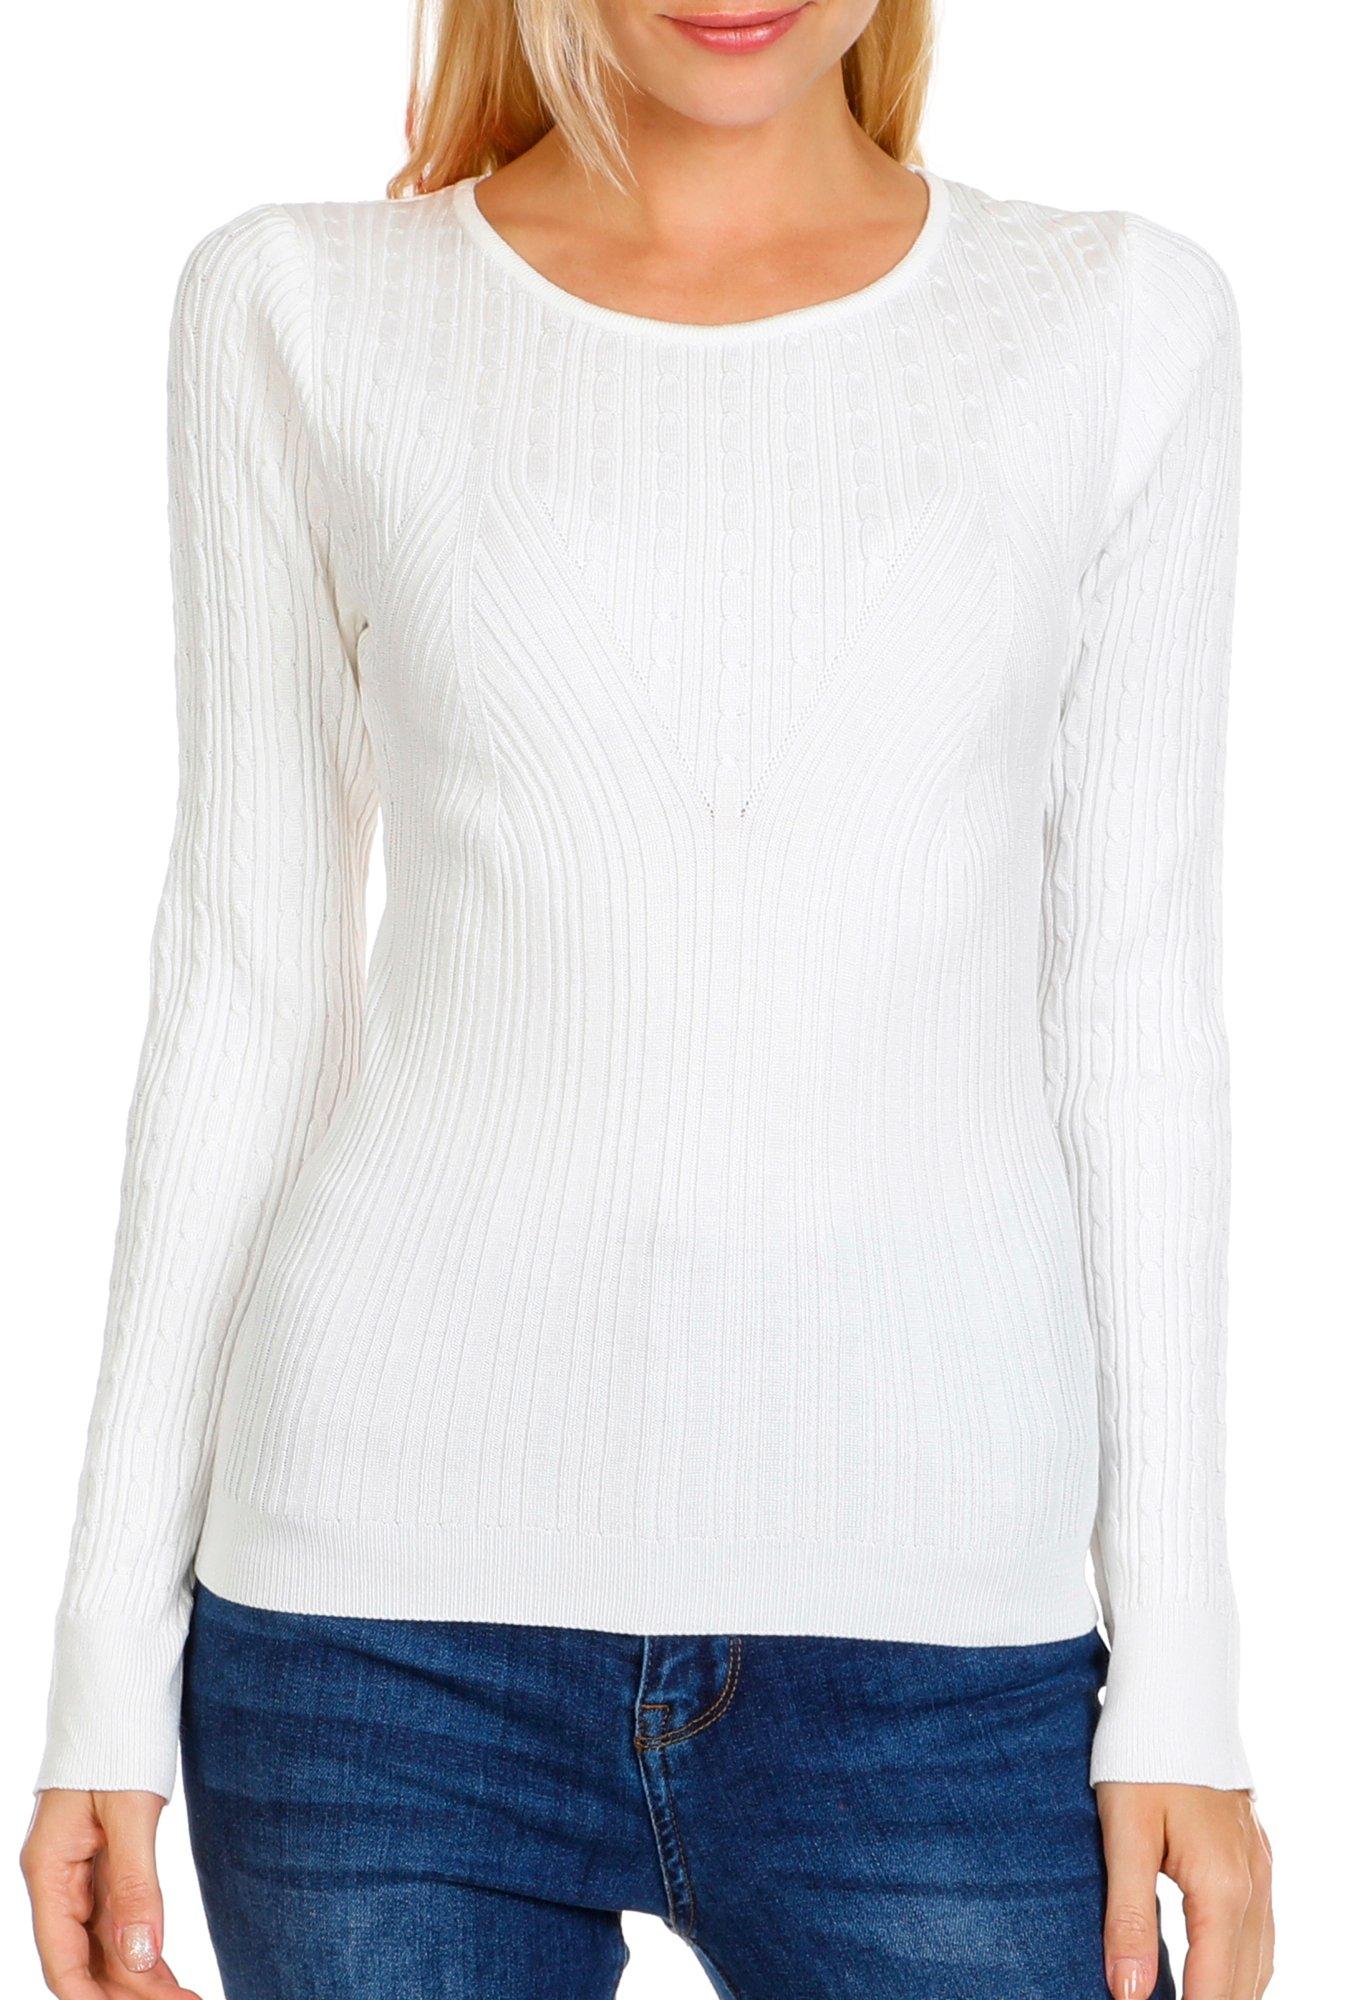 Juniors Solid Cable Knit Sweater Top